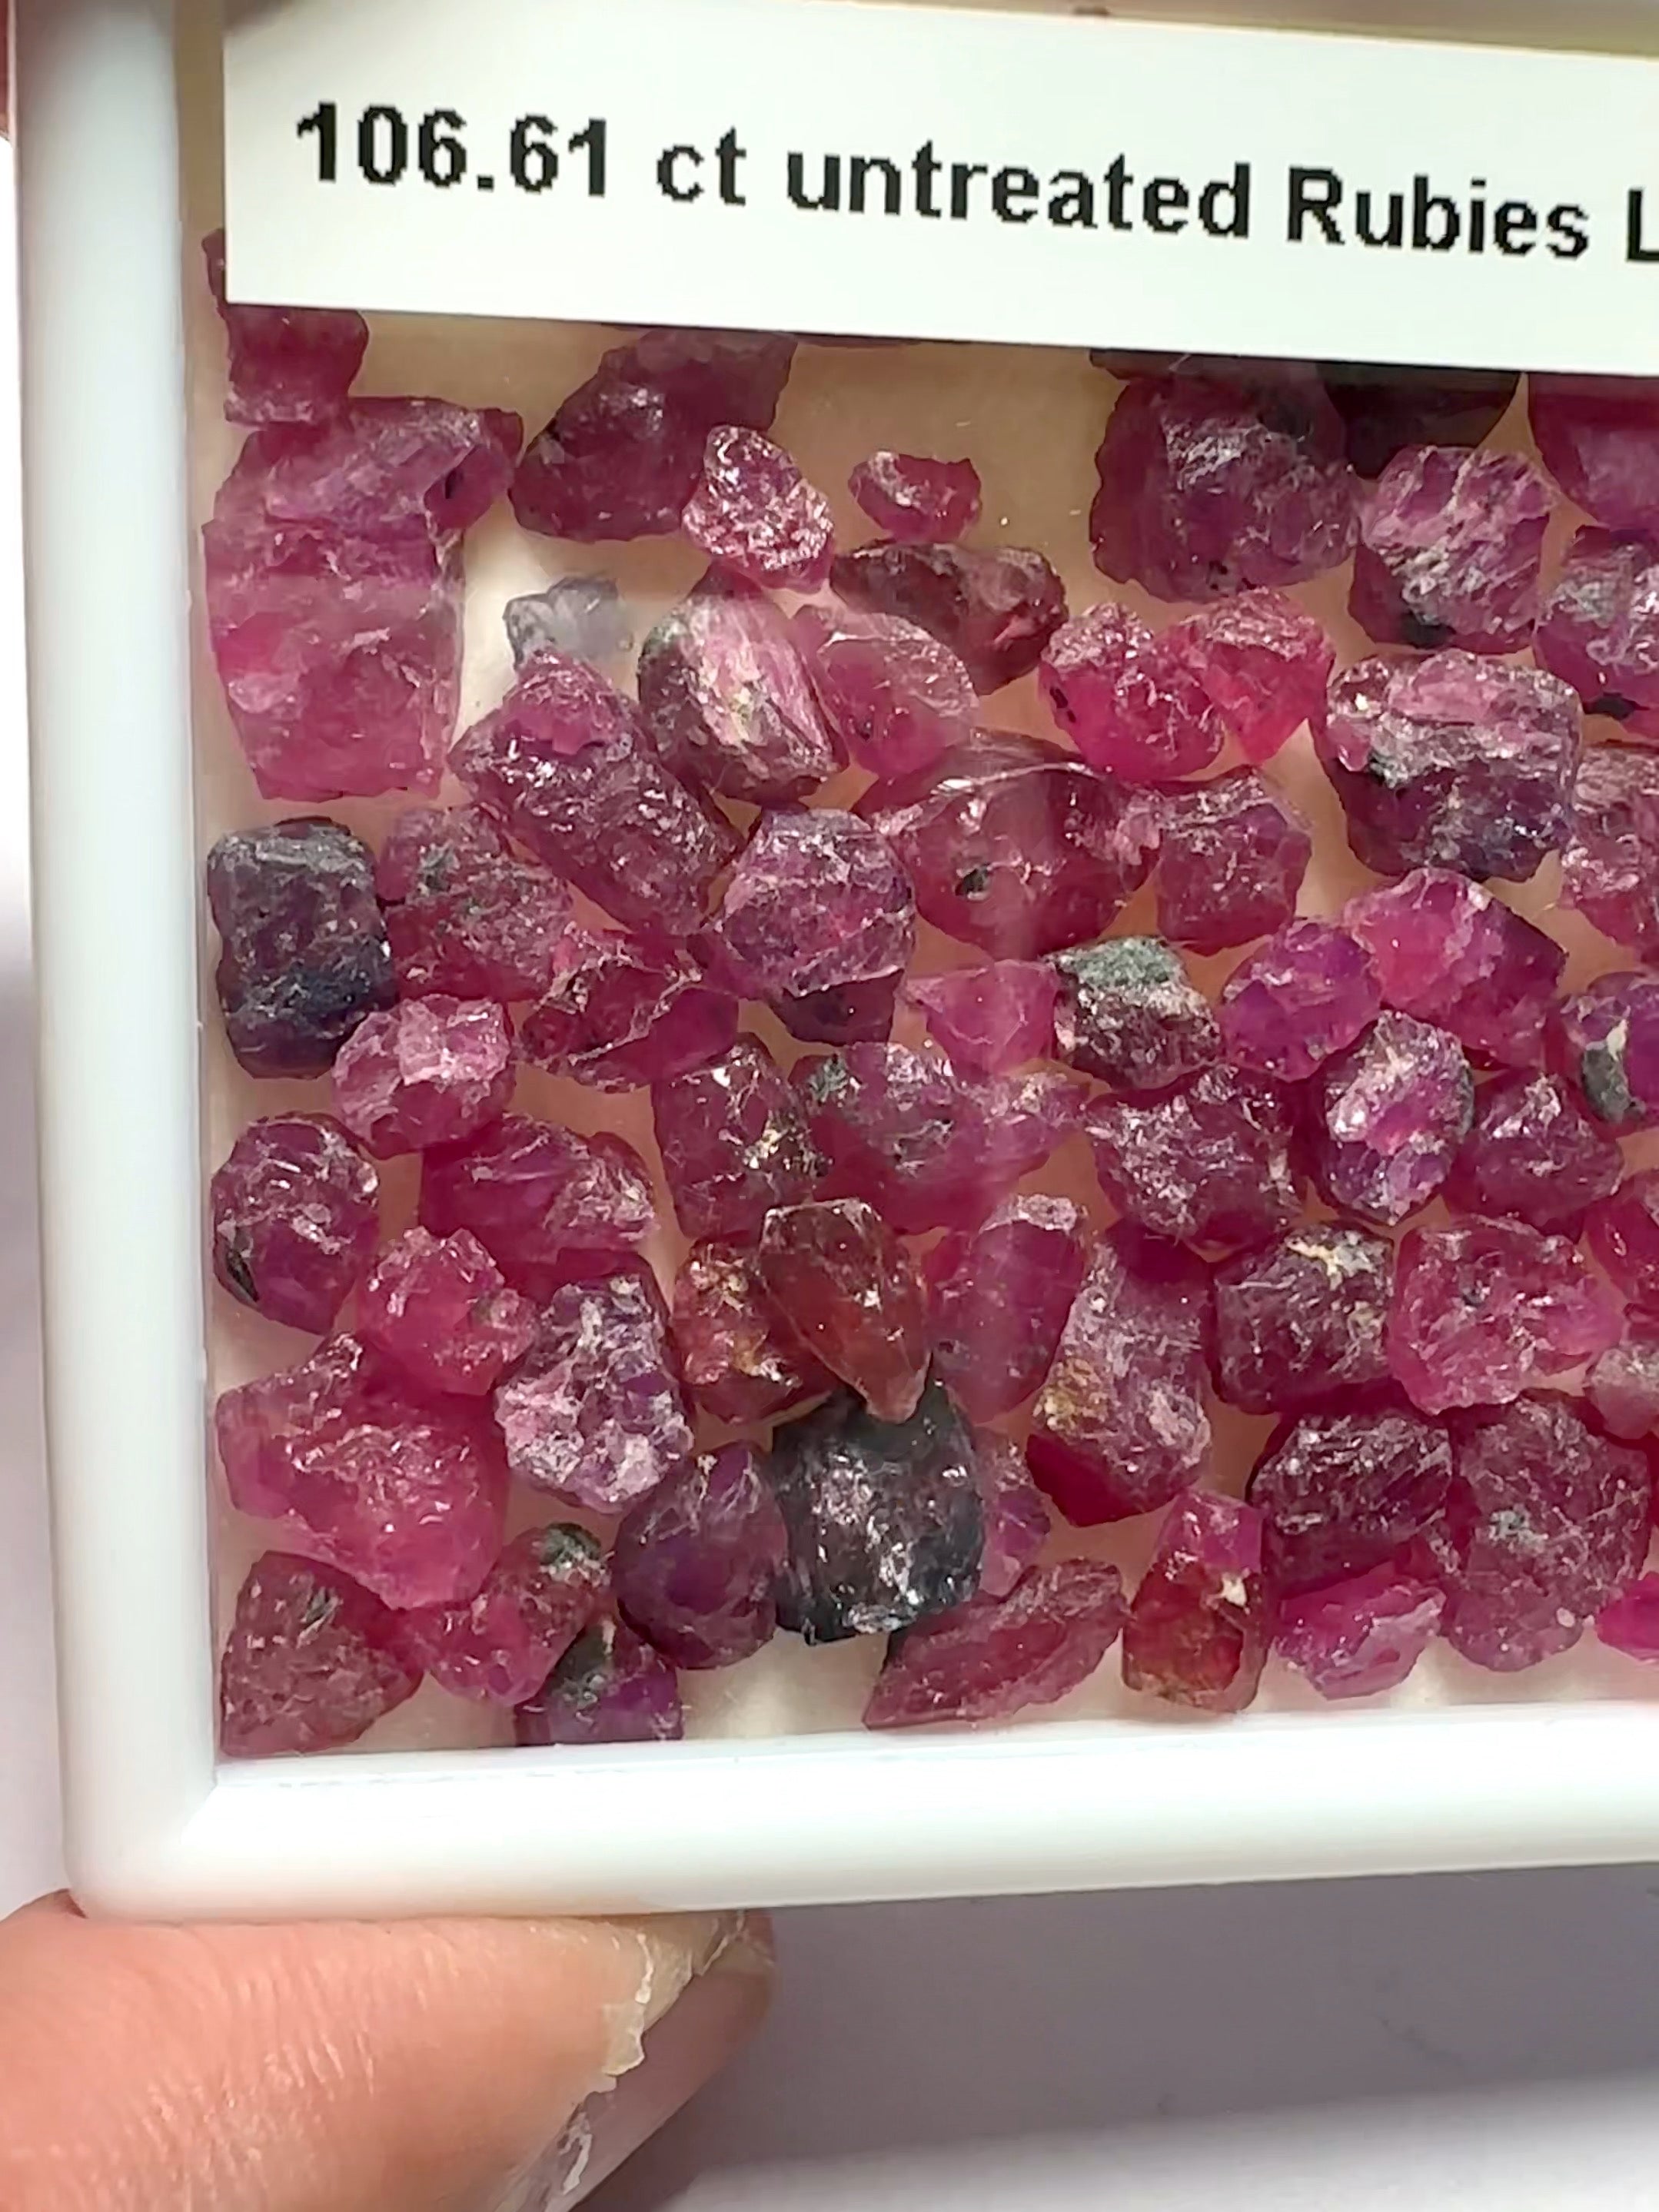 106.61ct Ruby Lot, Winza, Tanzania, Untreated Unheated, good for setting as is